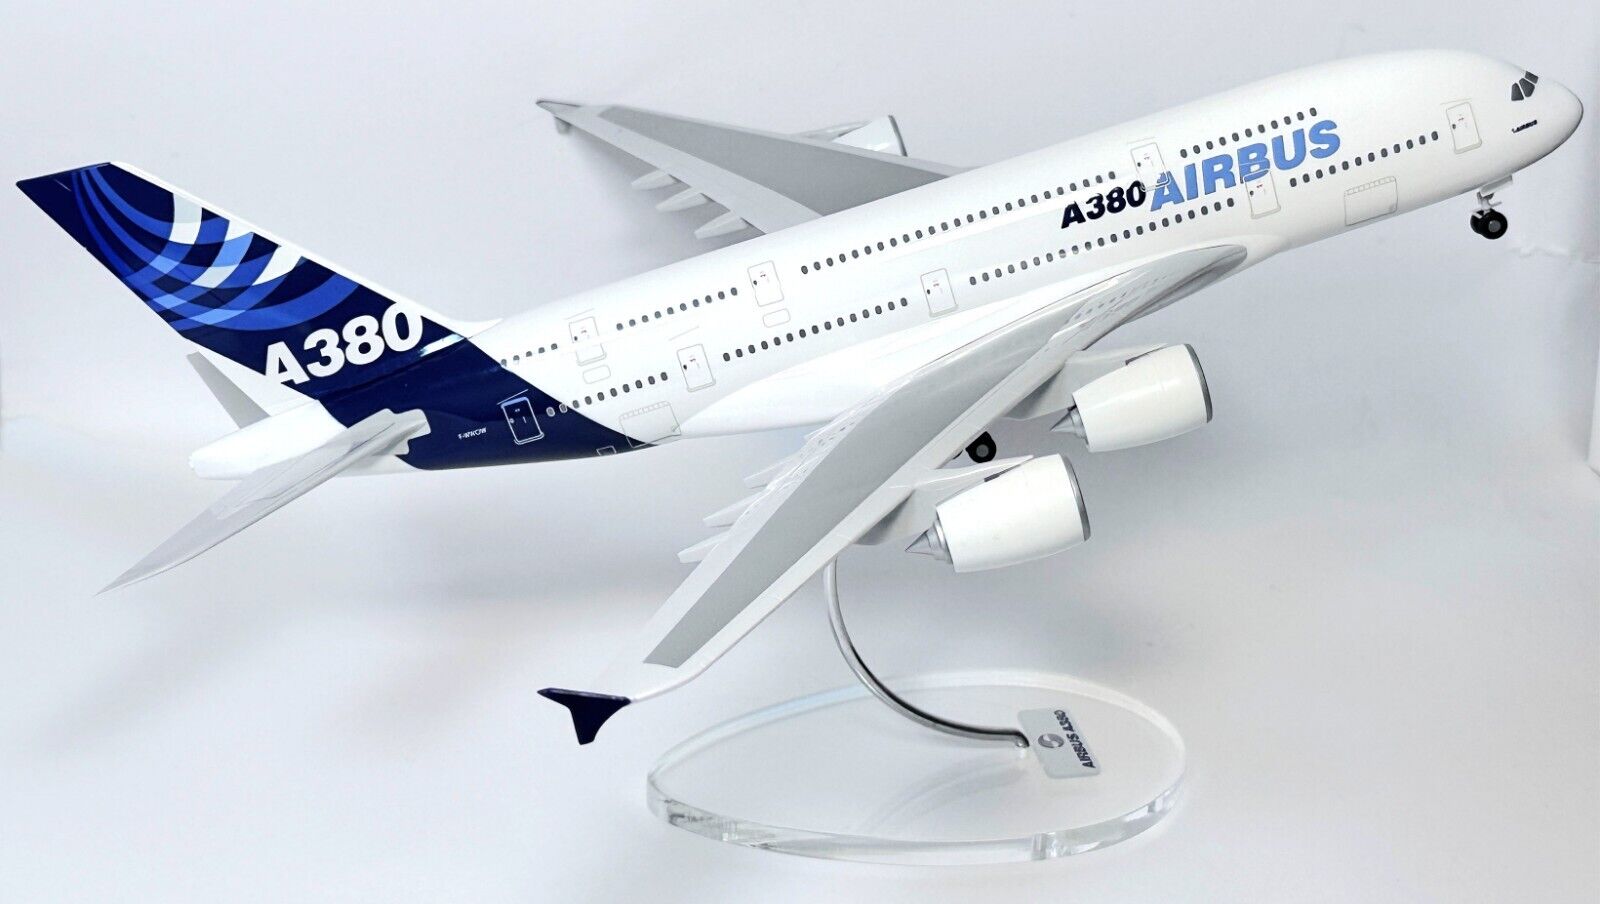 Airbus A380 House Livery Premium Risesoon Skymarks Collectors Model Scale 1:200